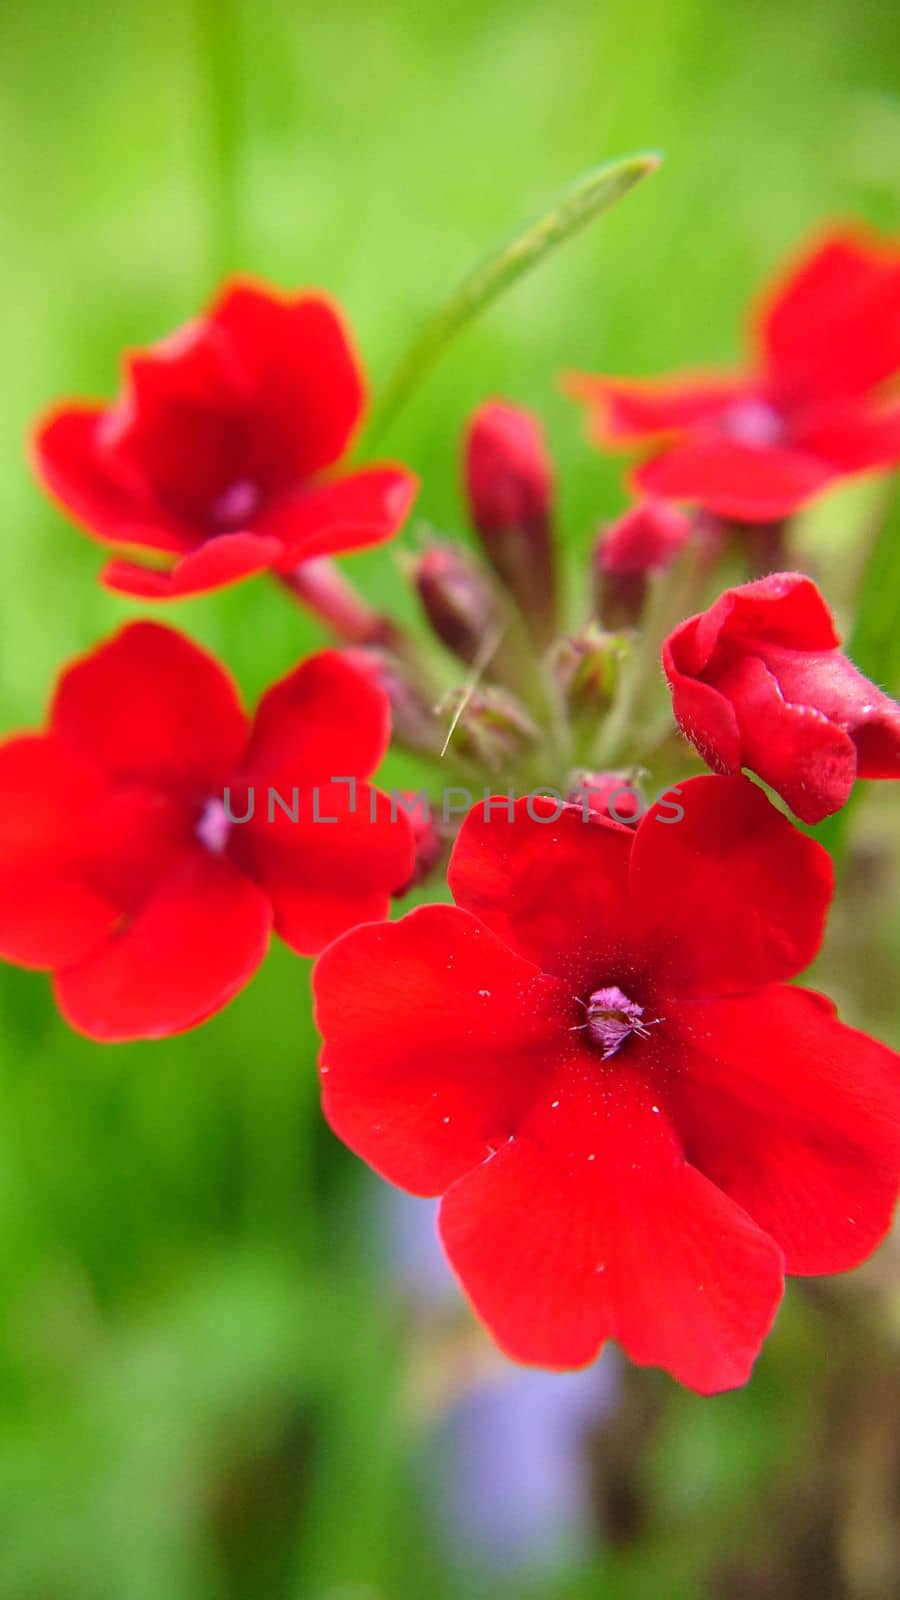 Bright red verbena flowers in the open air close-up.Macrophotography.Texture or background.Selective focus